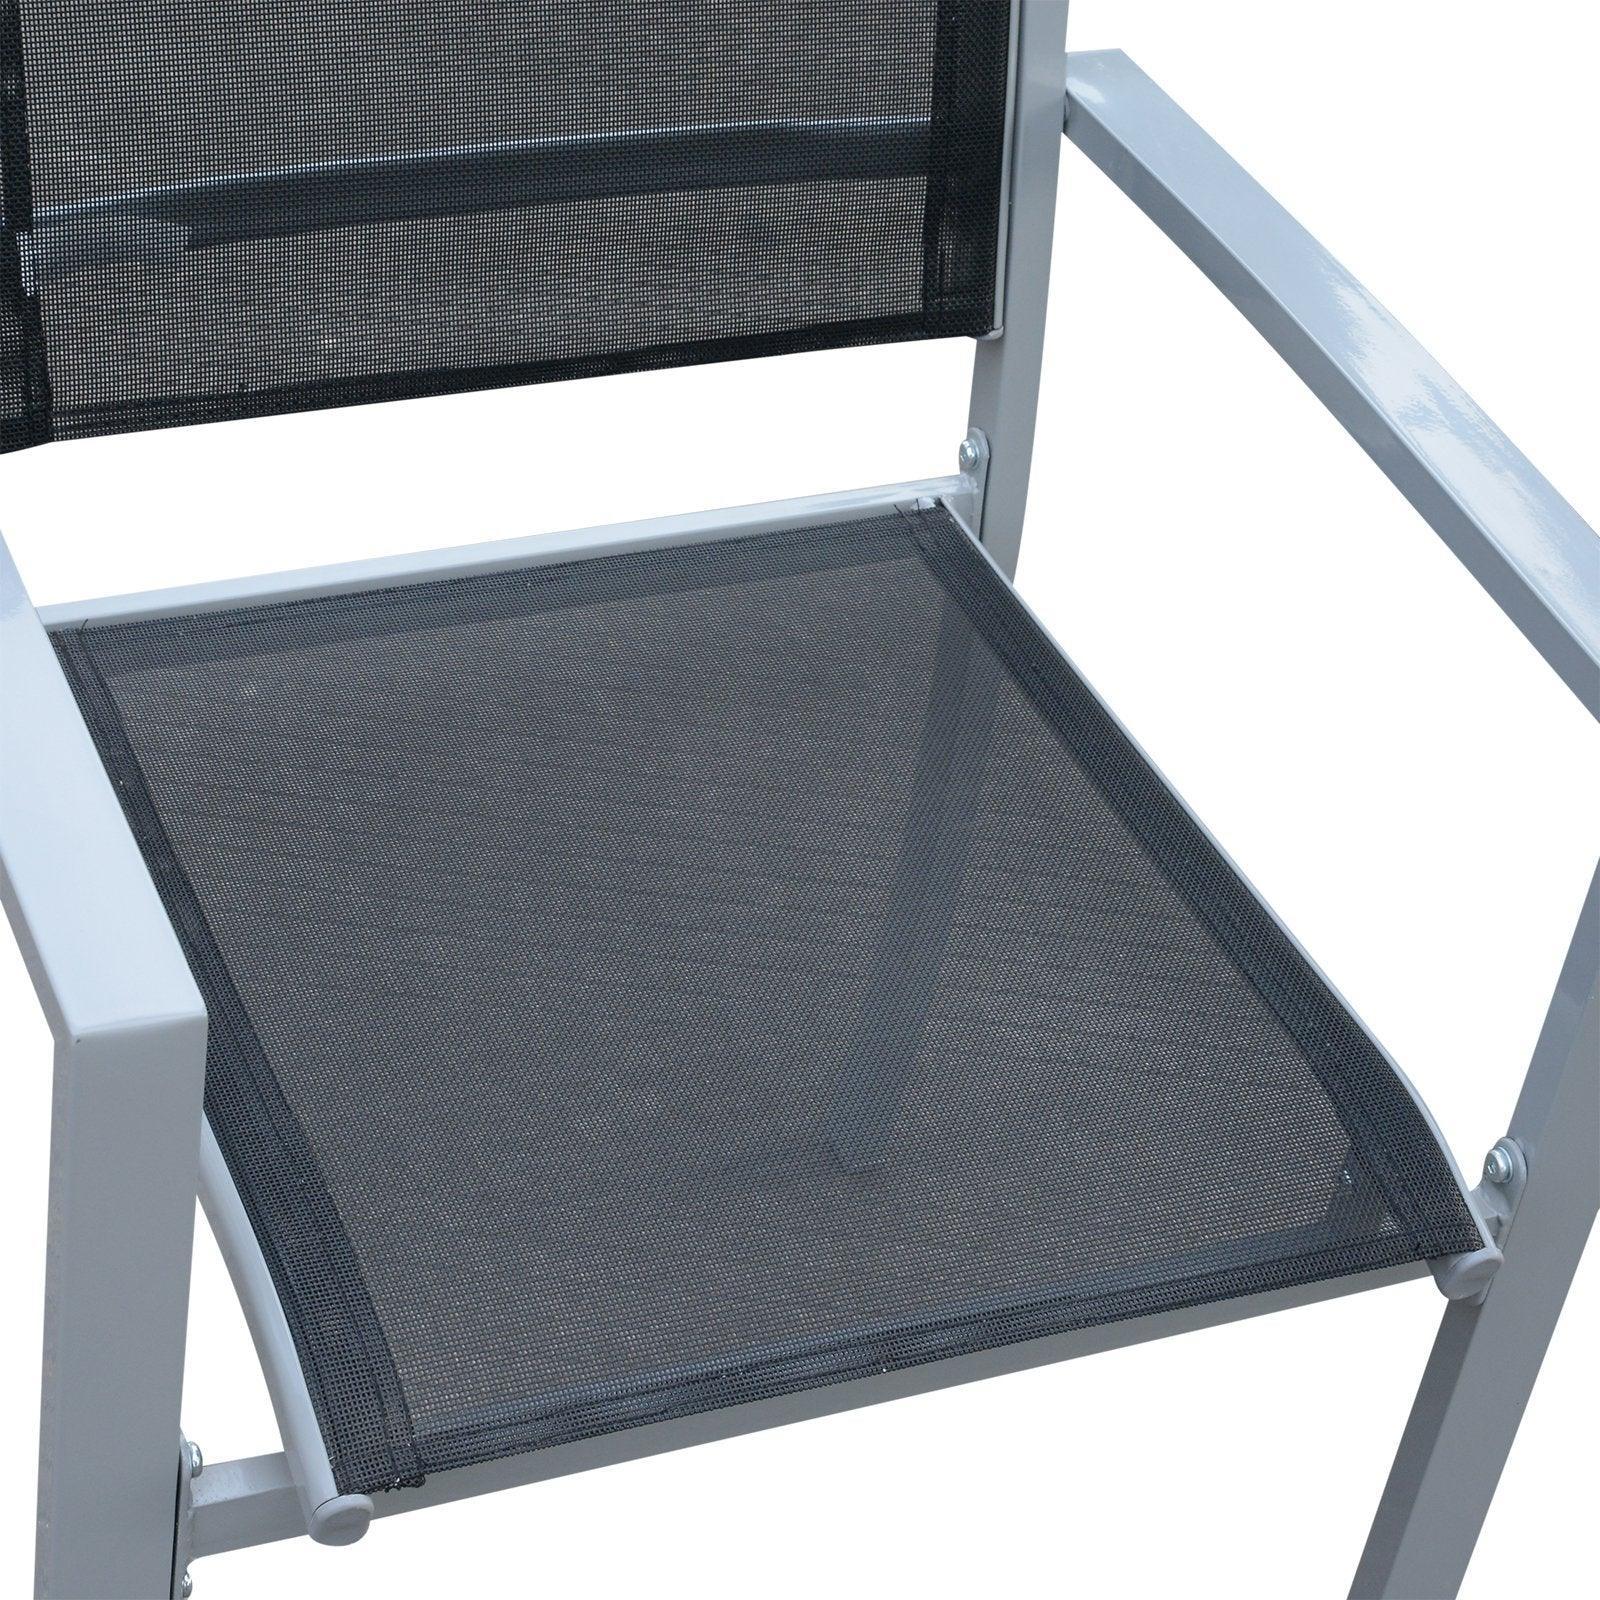 Outsunny Outdoor Chairs: Steel Frame, Texteline Seats, Black/Grey - ALL4U RETAILER LTD